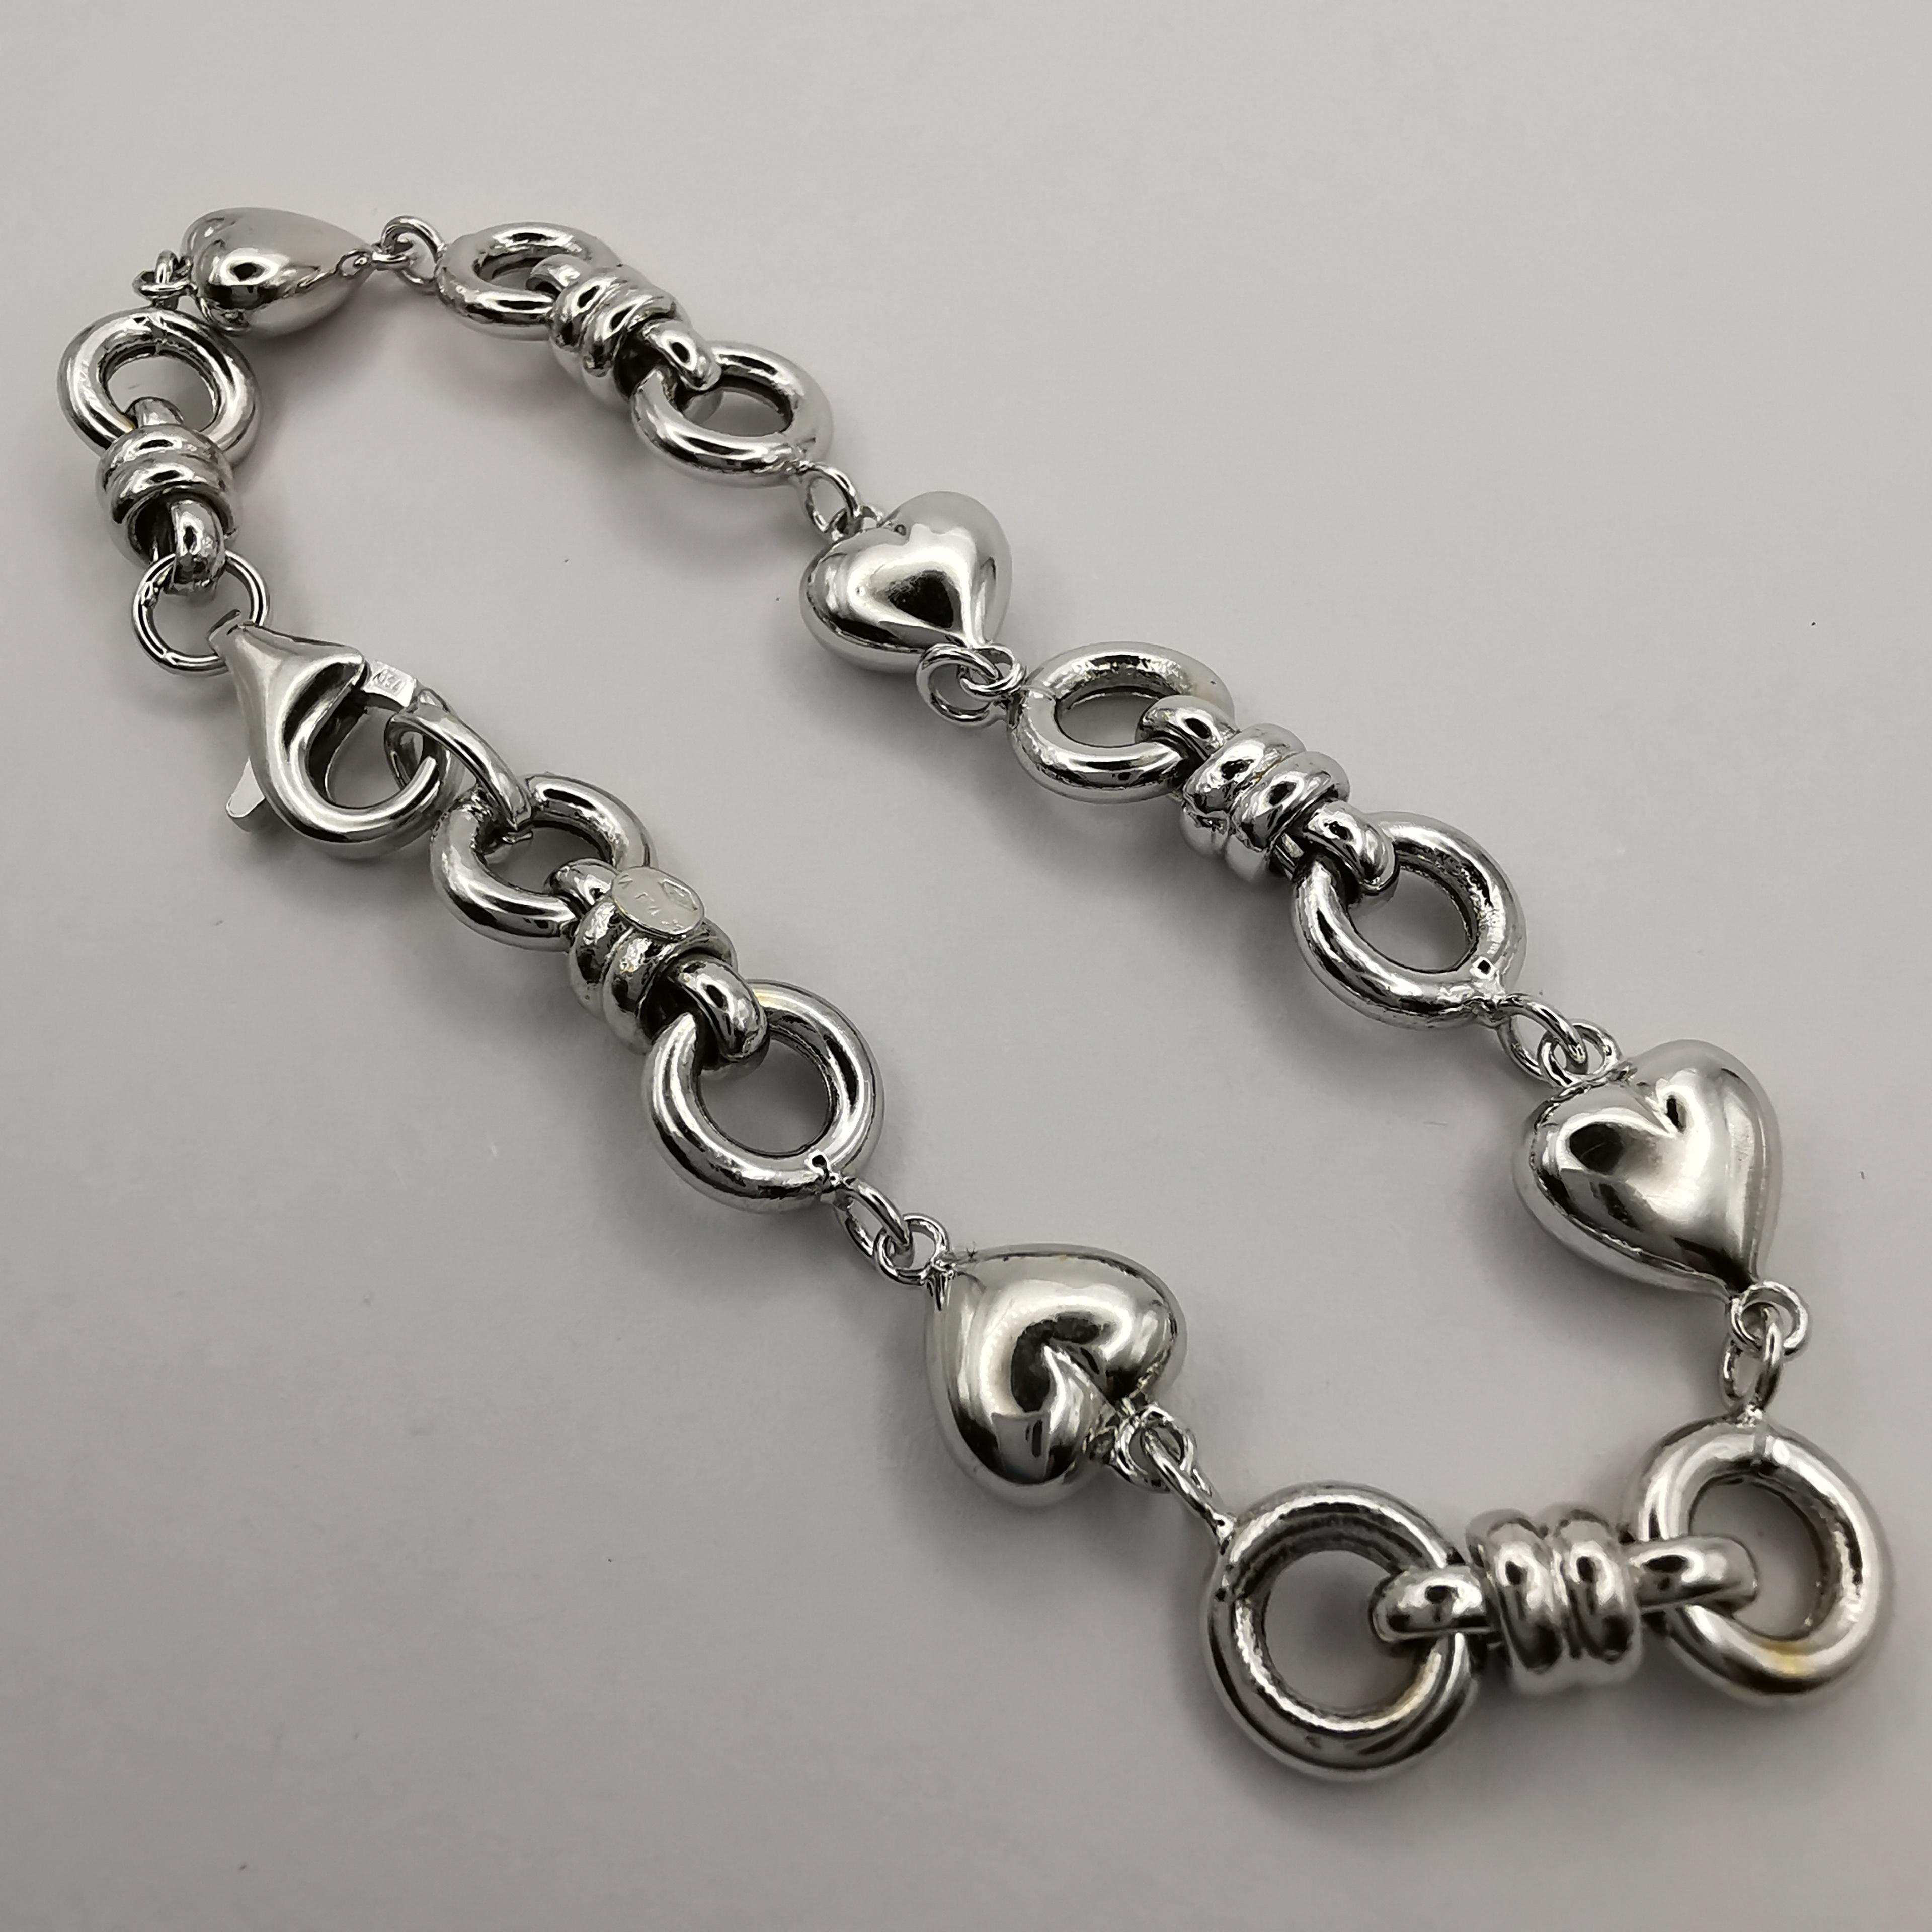 This chain hearts bracelet is a beautiful and elegant piece that is sure to make a statement. Made with 18K white gold, the bracelet features a series of linked hearts that flow seamlessly along the wrist. The white gold adds a bright and polished